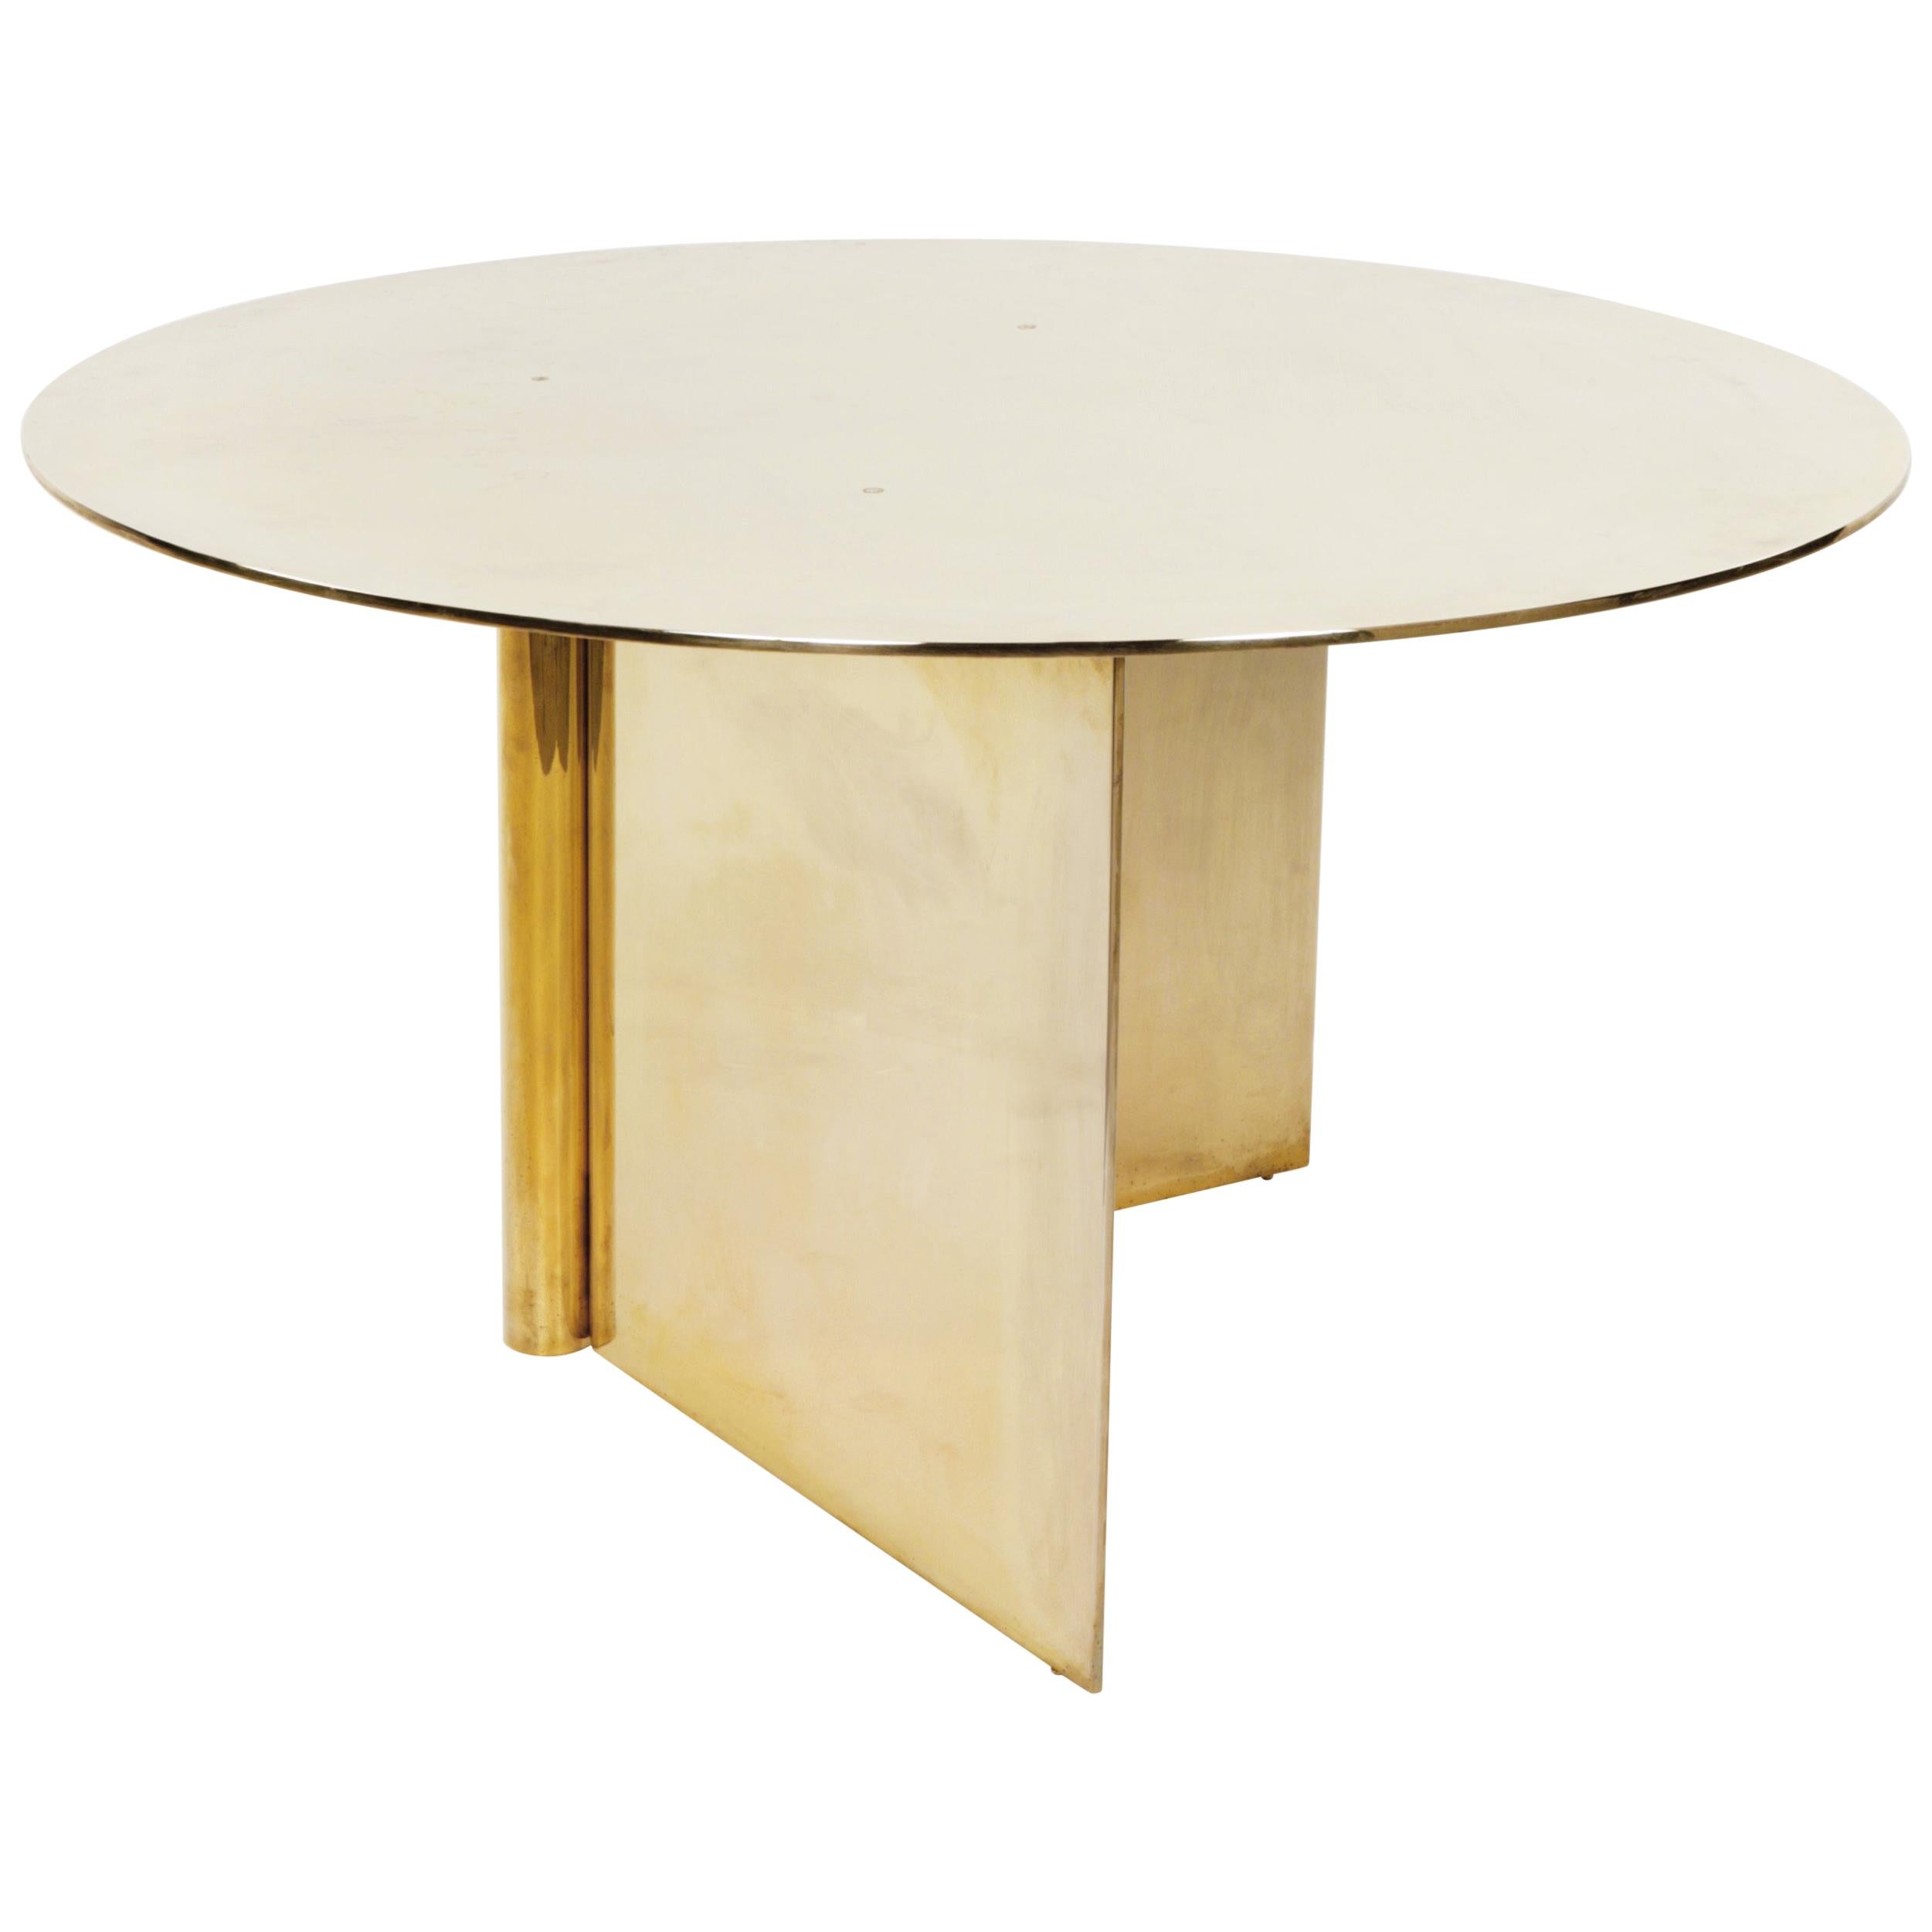 Os Table Large I in Matte Aluminium, Blackened, and Satin Brass